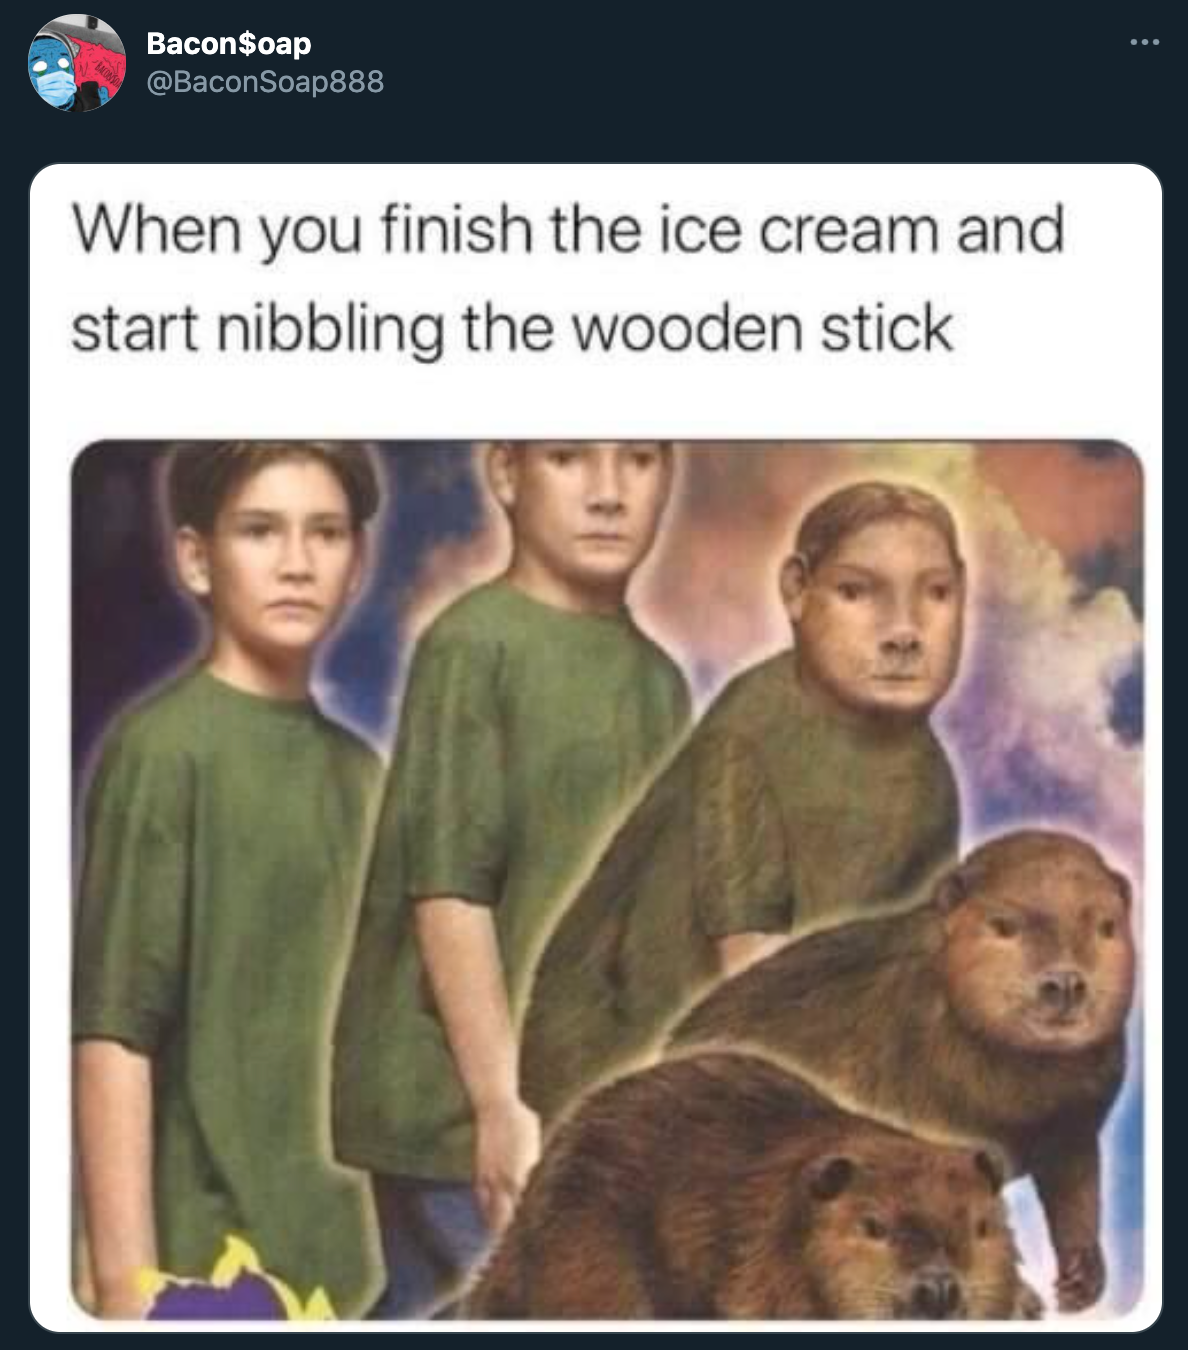 funny twitter jokes and memes - When you finish the ice cream and start nibbling the wooden stick